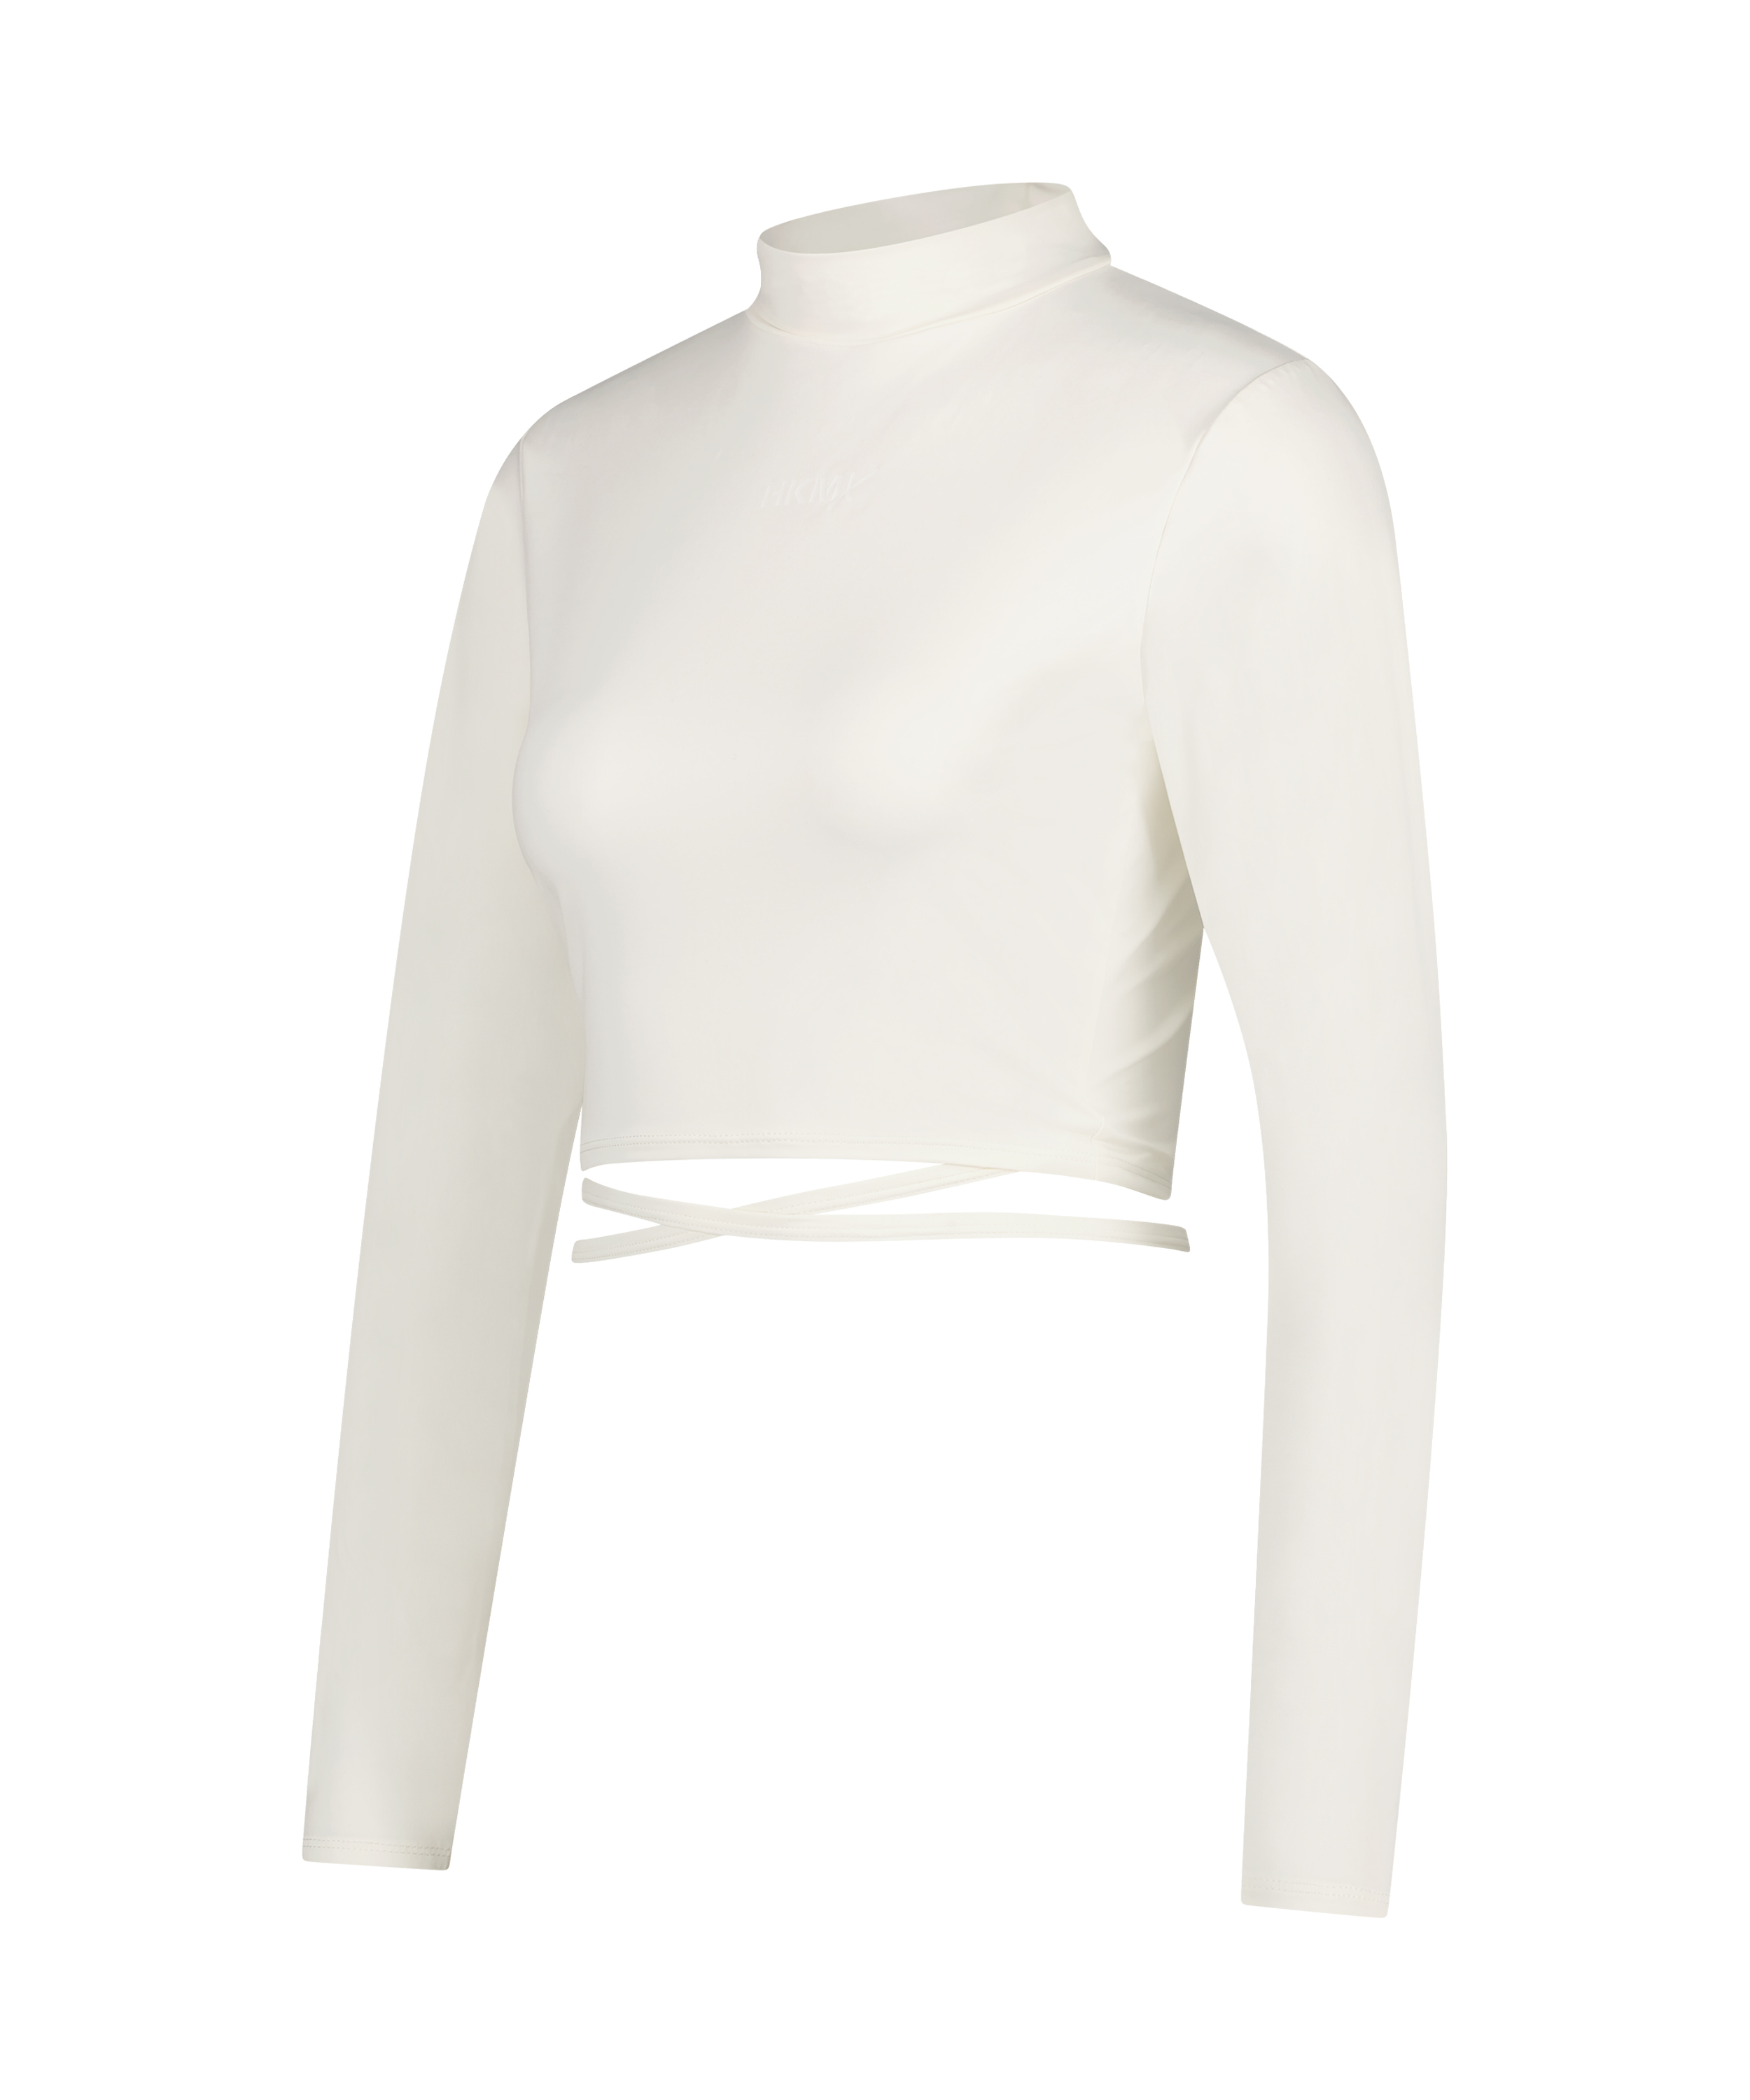 HKMX Long-sleeved sports top, White, main